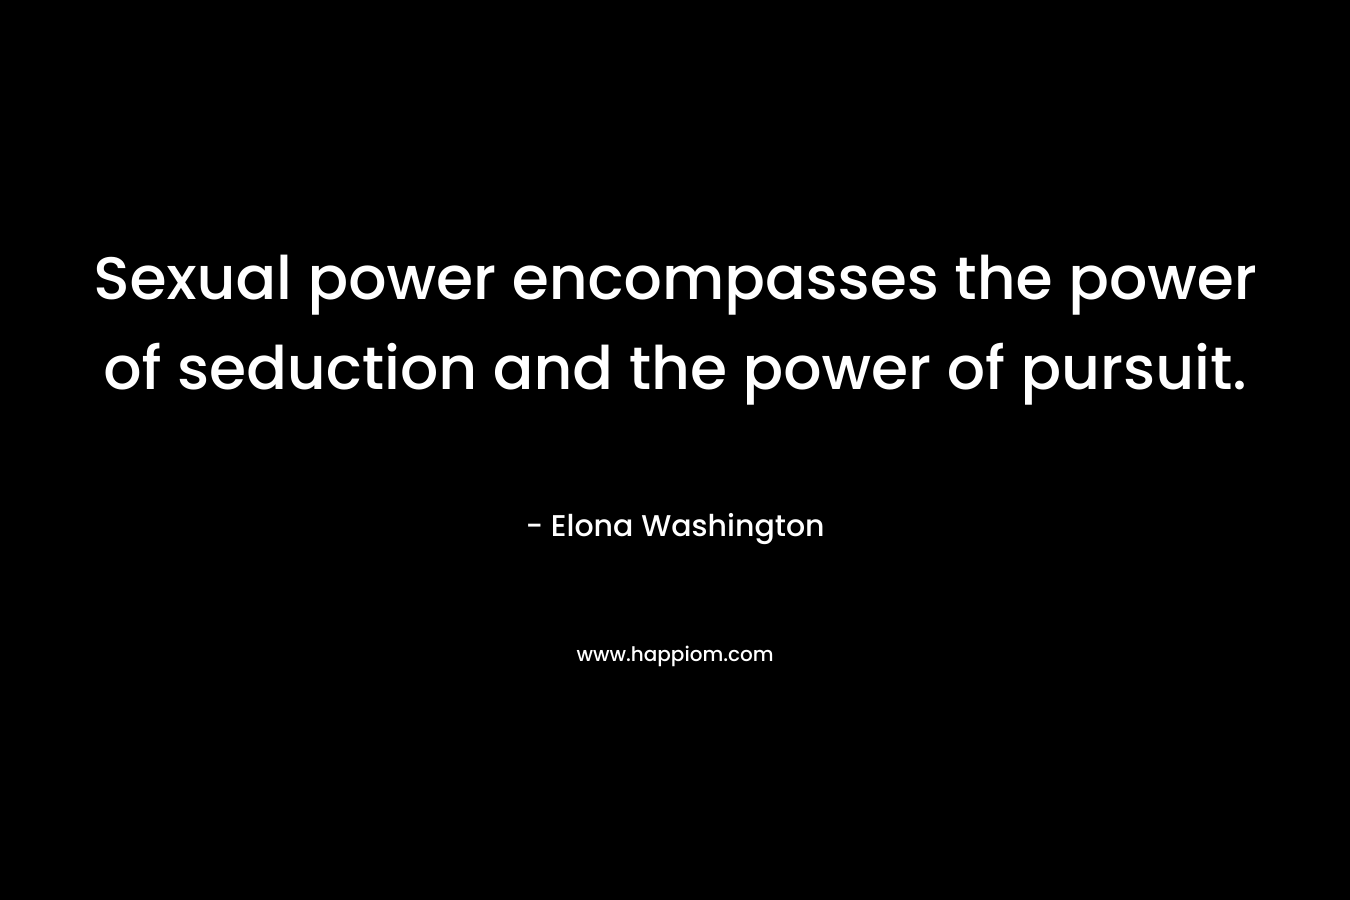 Sexual power encompasses the power of seduction and the power of pursuit.